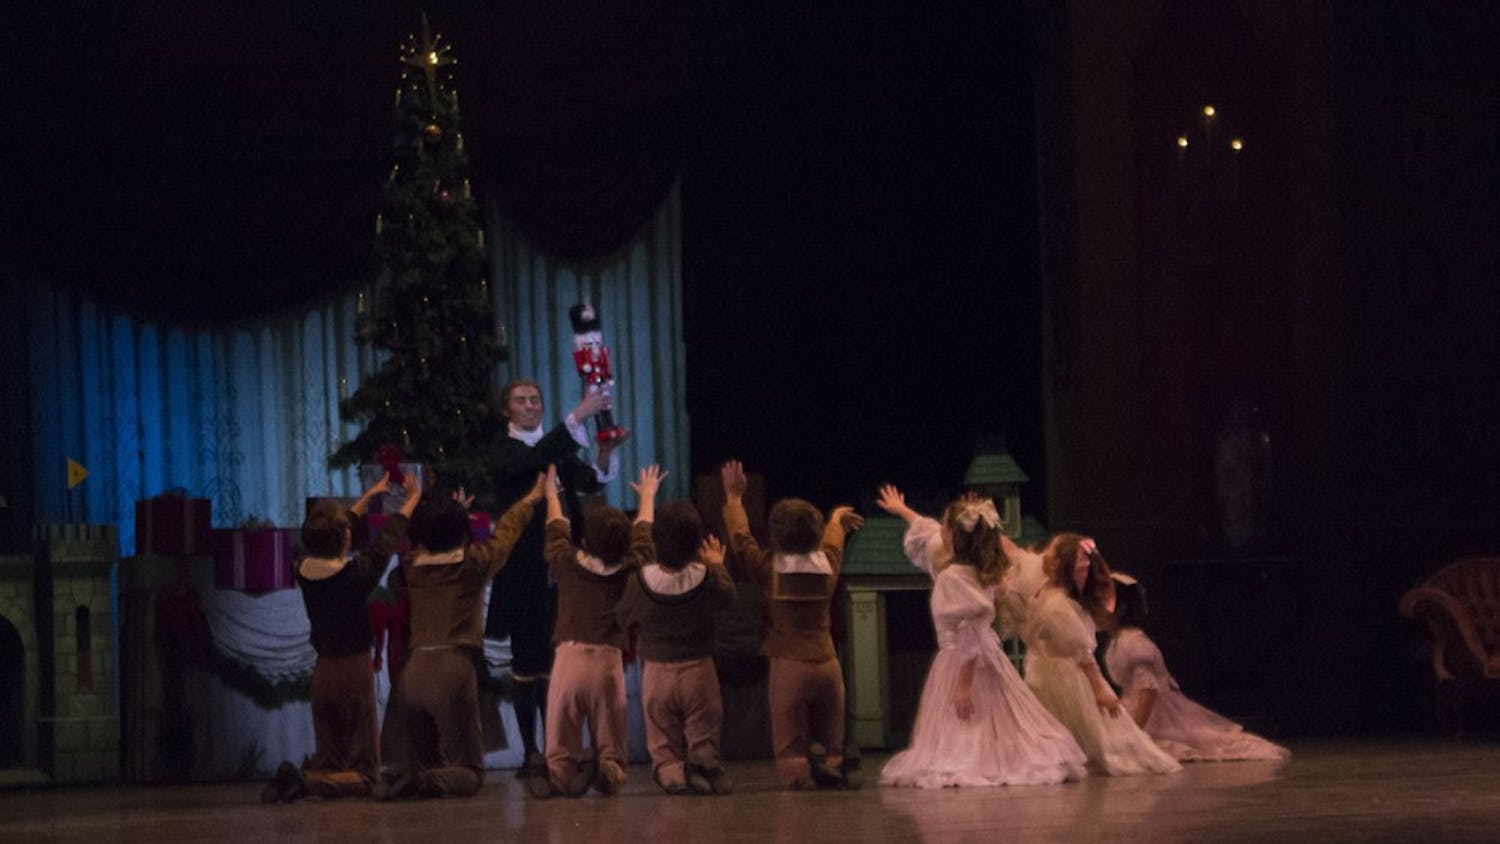 Drosselmeyer, played by junior Antonio Houck, shows a nutcracker to the children in "The Nutcracker". The ballet will run Nov. 30, Dec. 1 and 2 at 7:30 p.m., and Dec. 2 and 3 at 2 p.m. at the Musical Arts Center.